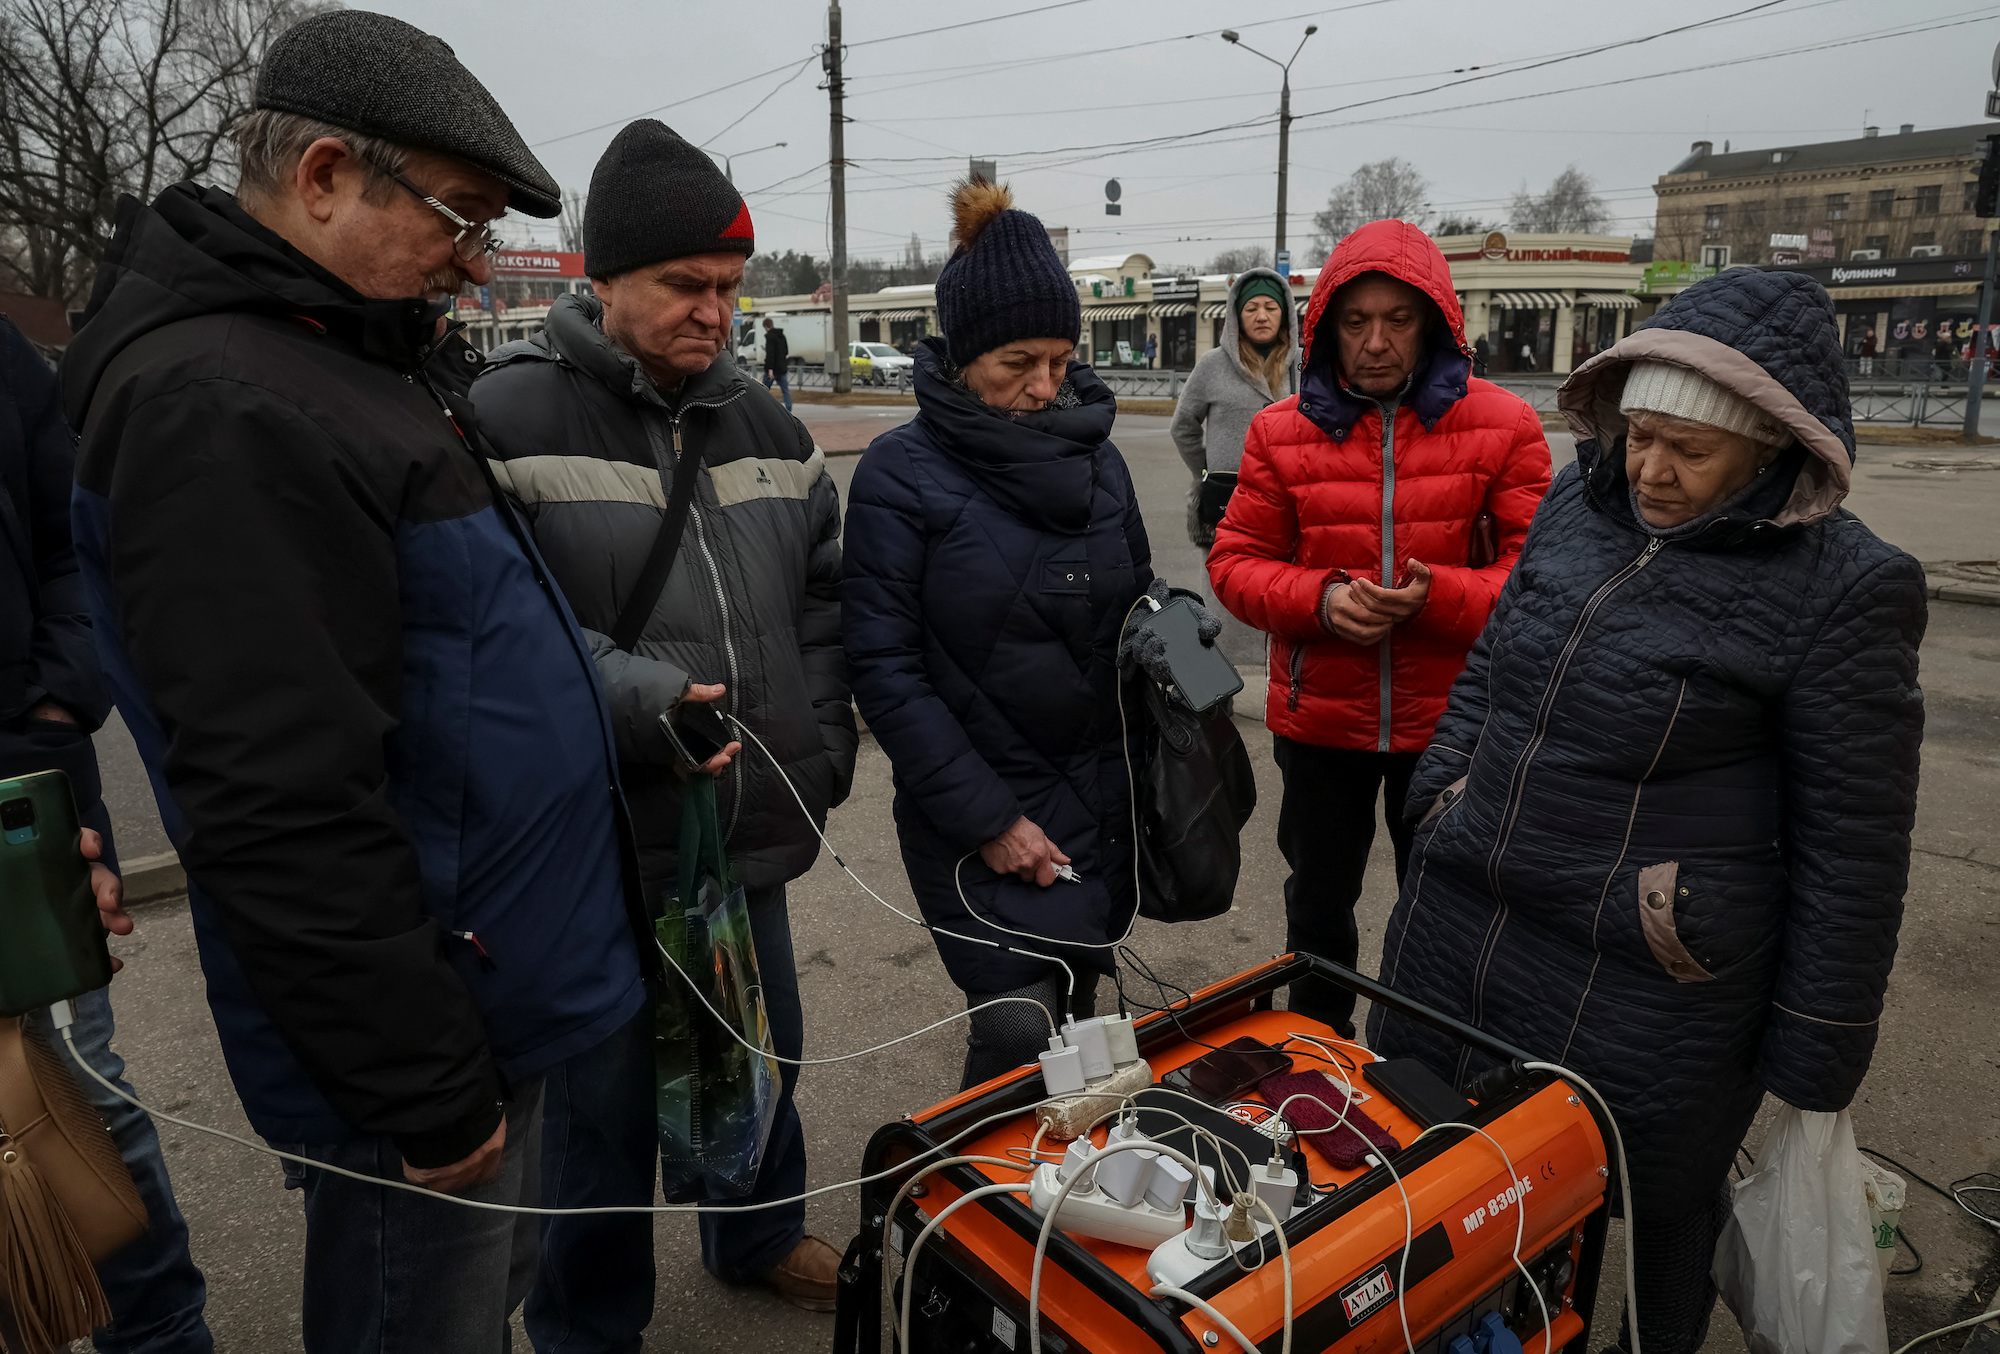 Local residents charge their phones powered via generator during a power outage after energy infrastructure was hit by Russian missile attacks in Kharkiv on Thursday.